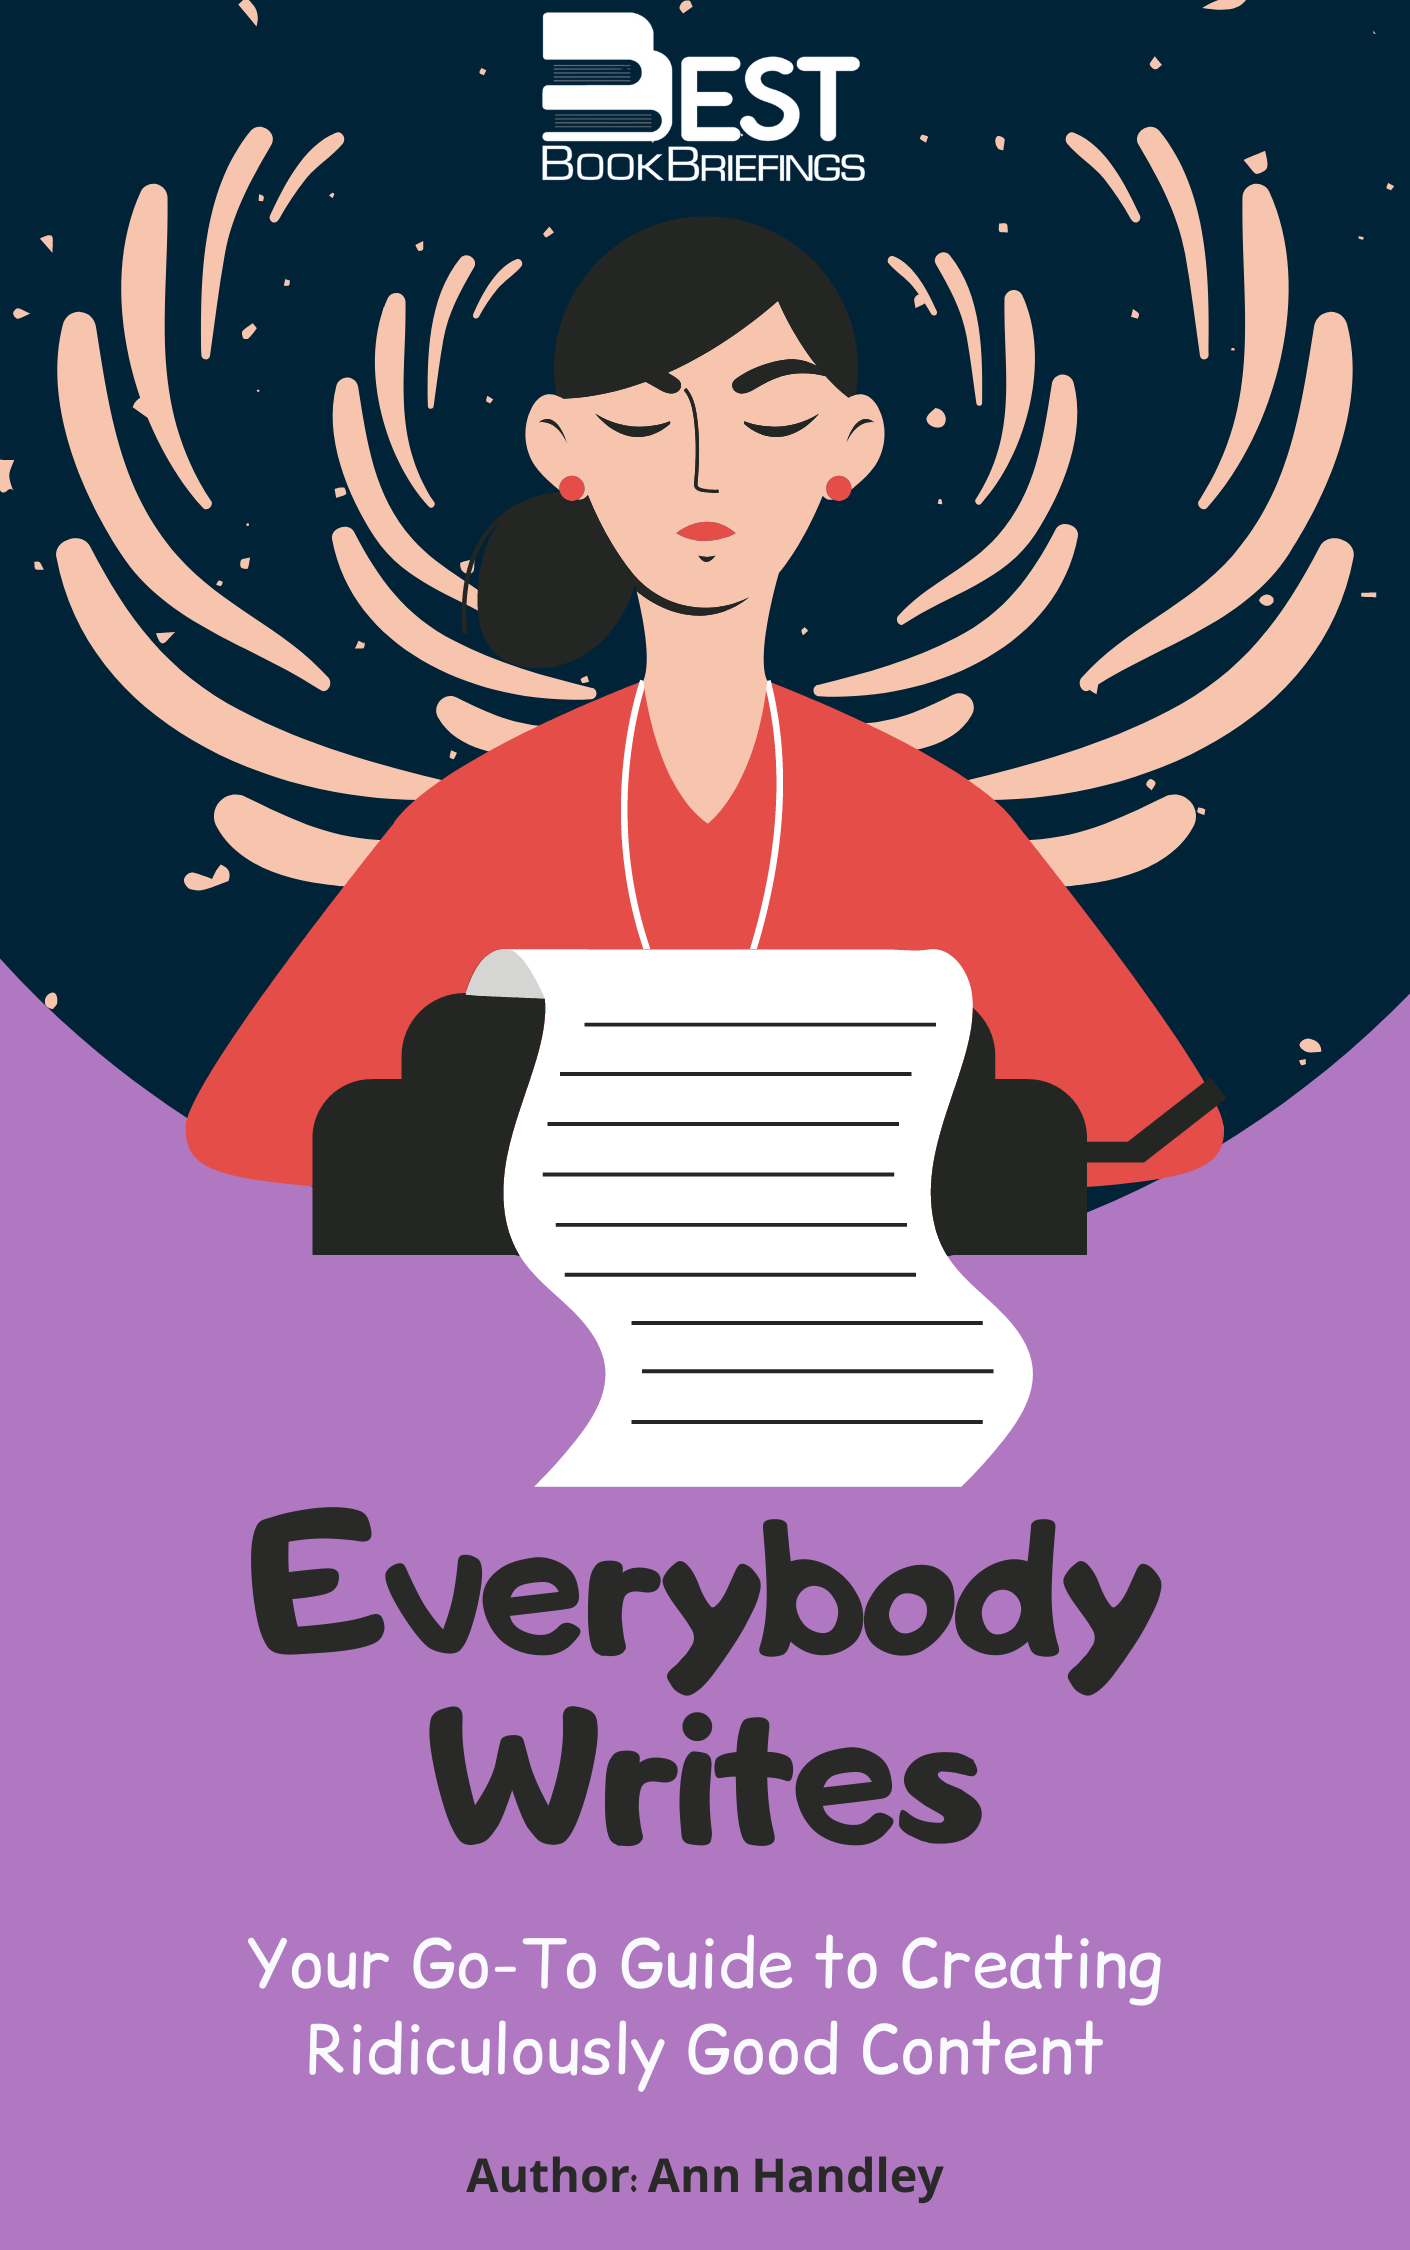 Everybody Writes Your Go-To Guide to Creating Ridiculously Good Content Author: Ann Handley Content is everywhere, from TV, the internet, and billboards. However, writing high-quality content is a whole different story. This book summary of Everybody Writes will teach you how to craft content and integrate writing as a daily habit.  Why can everybody 